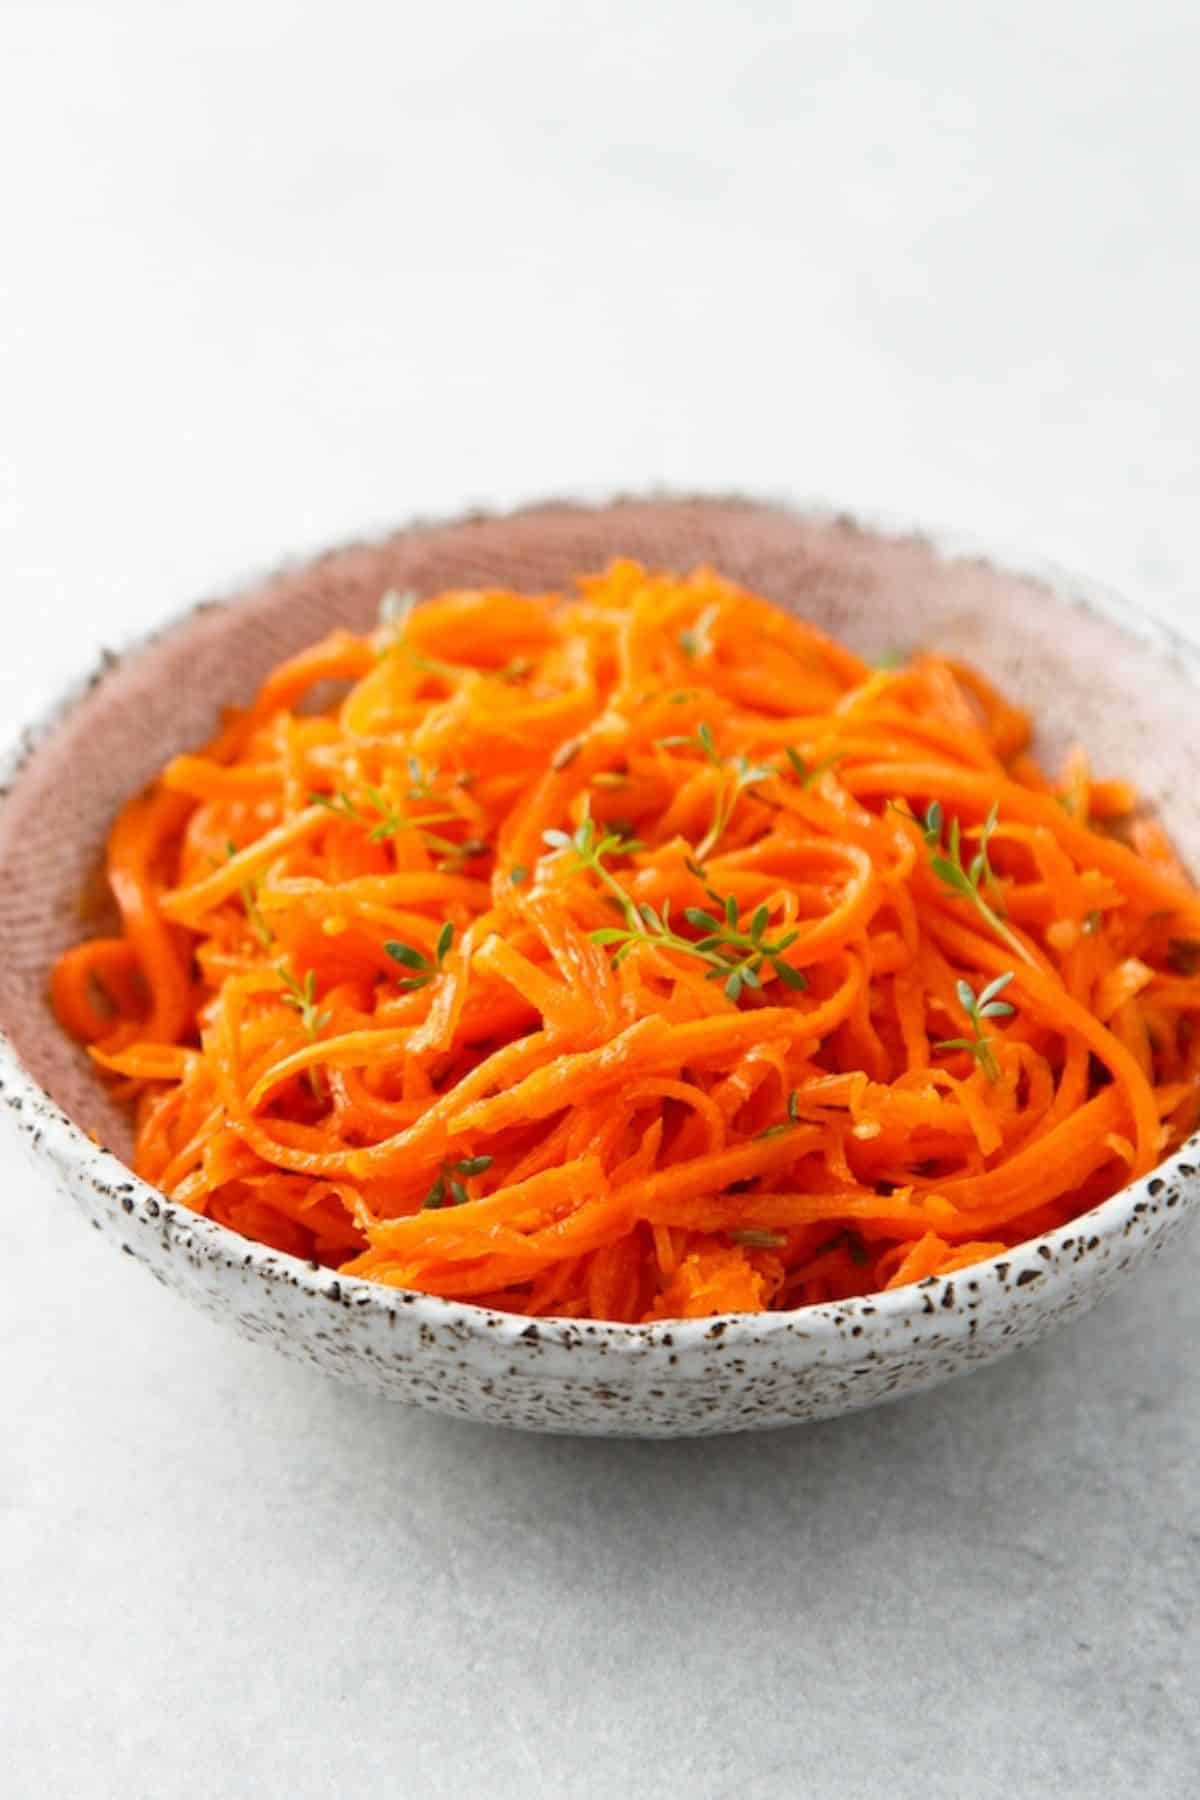 Shredded raw carrot salad topped with thyme.